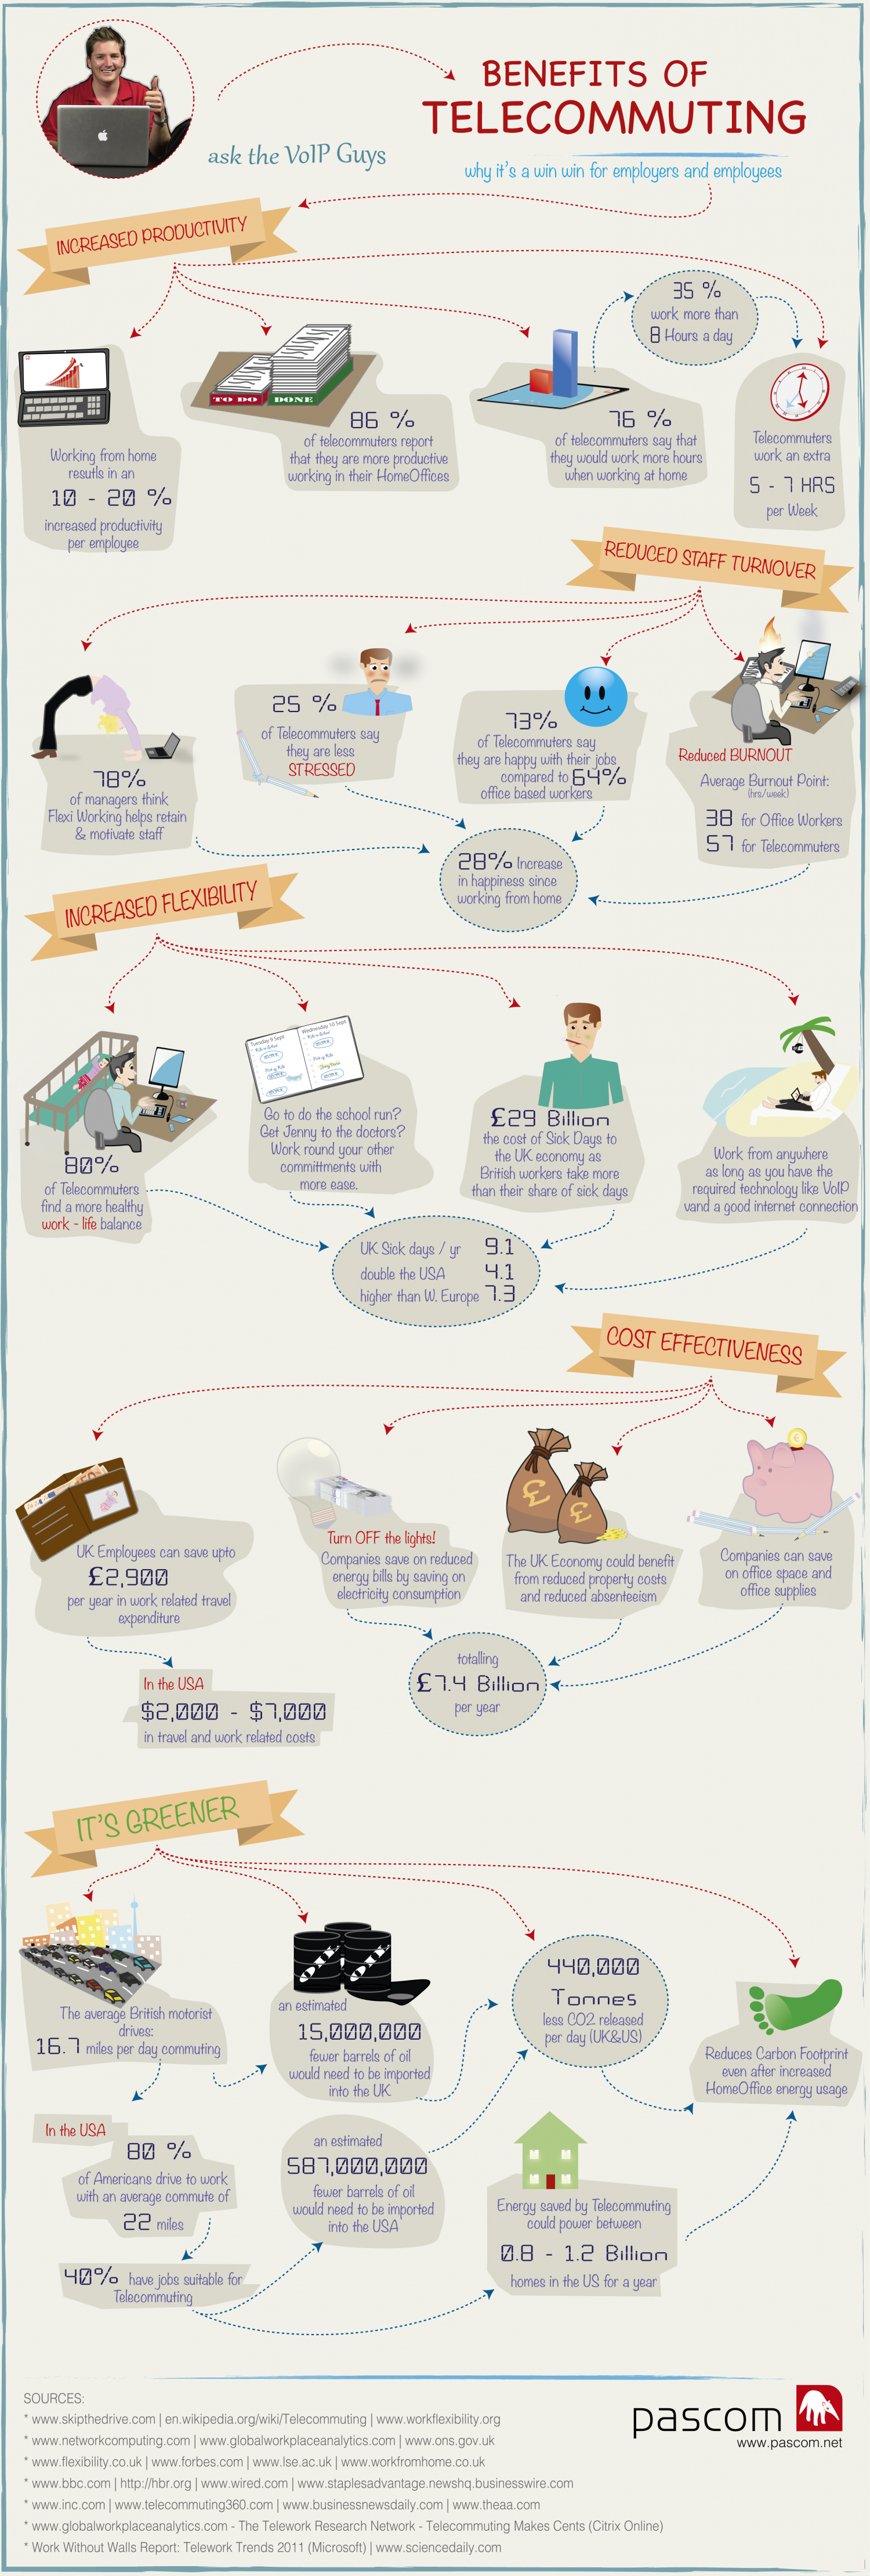 5 Benefits of Telecommuting - ask the VoIP Guys Infographic